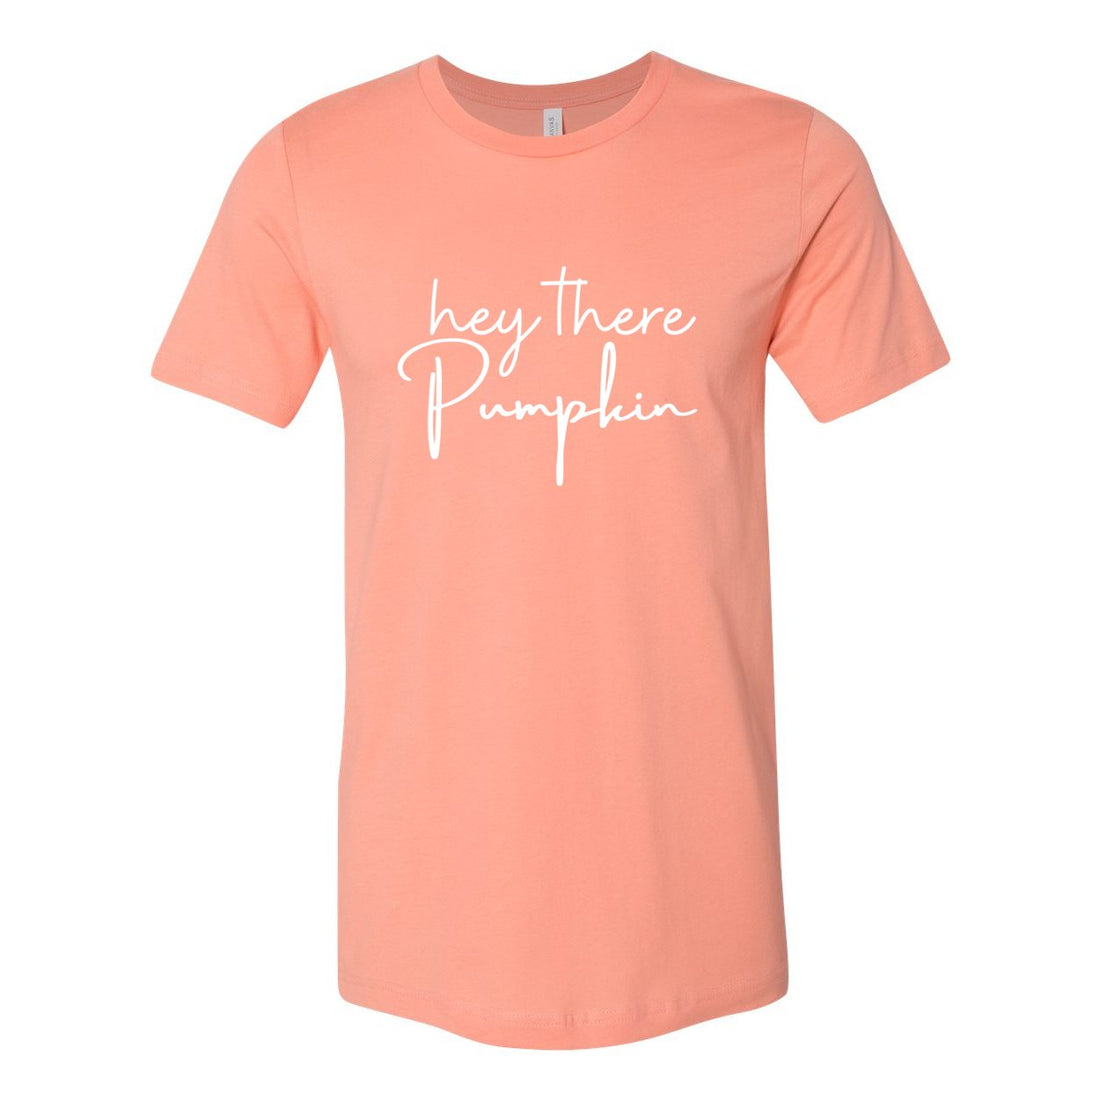 Hey There Pumpkin - T-Shirts - Positively Sassy - Hey There Pumpkin